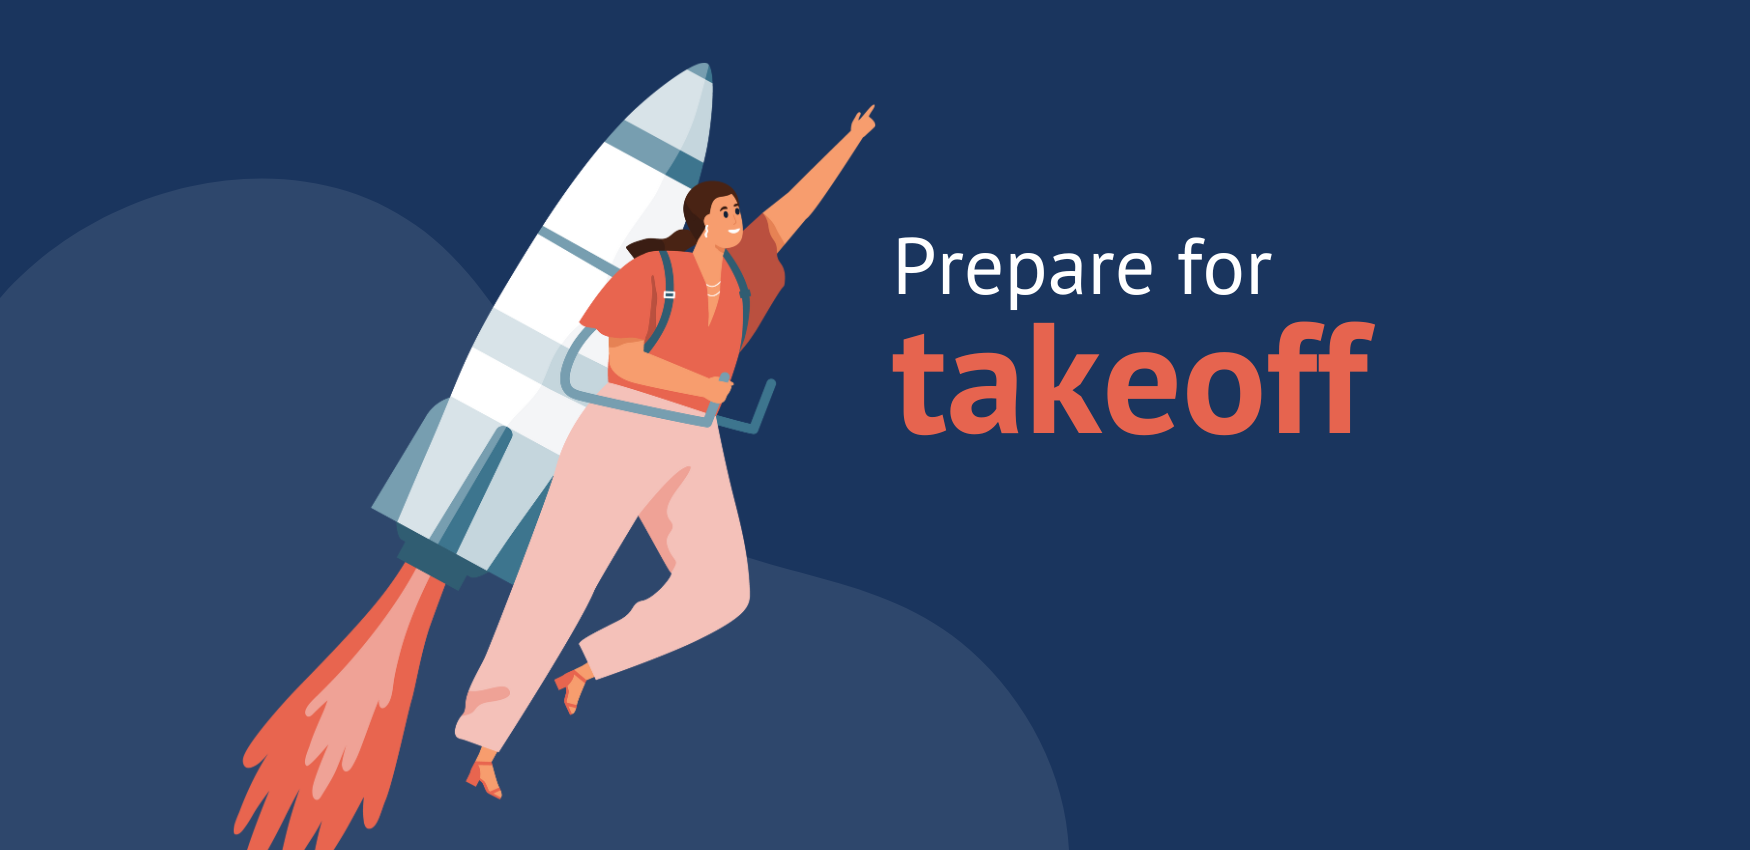 Implementation: 3 Steps to Prepare for Takeoff